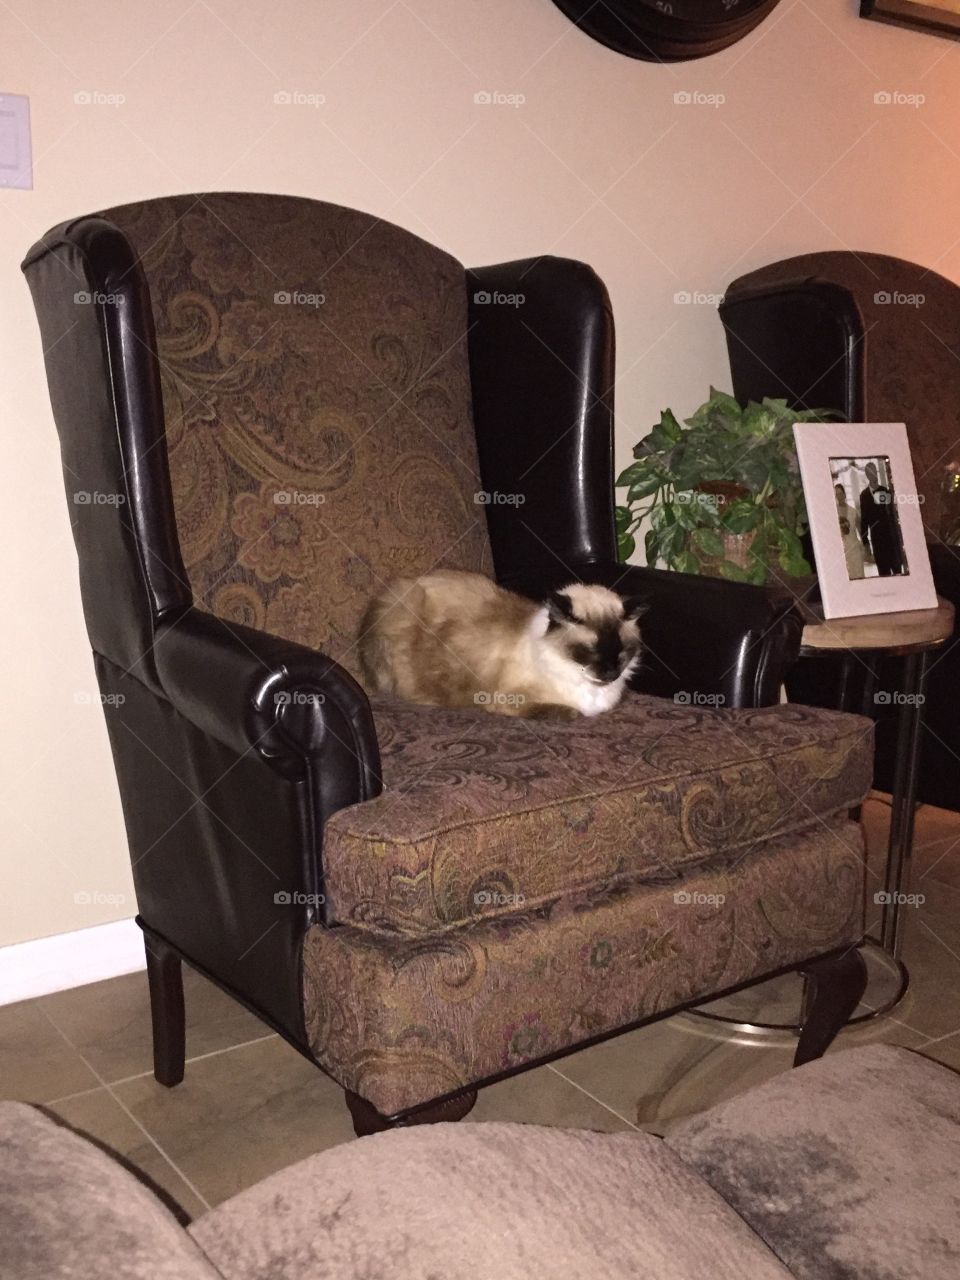 Cat on Chair 